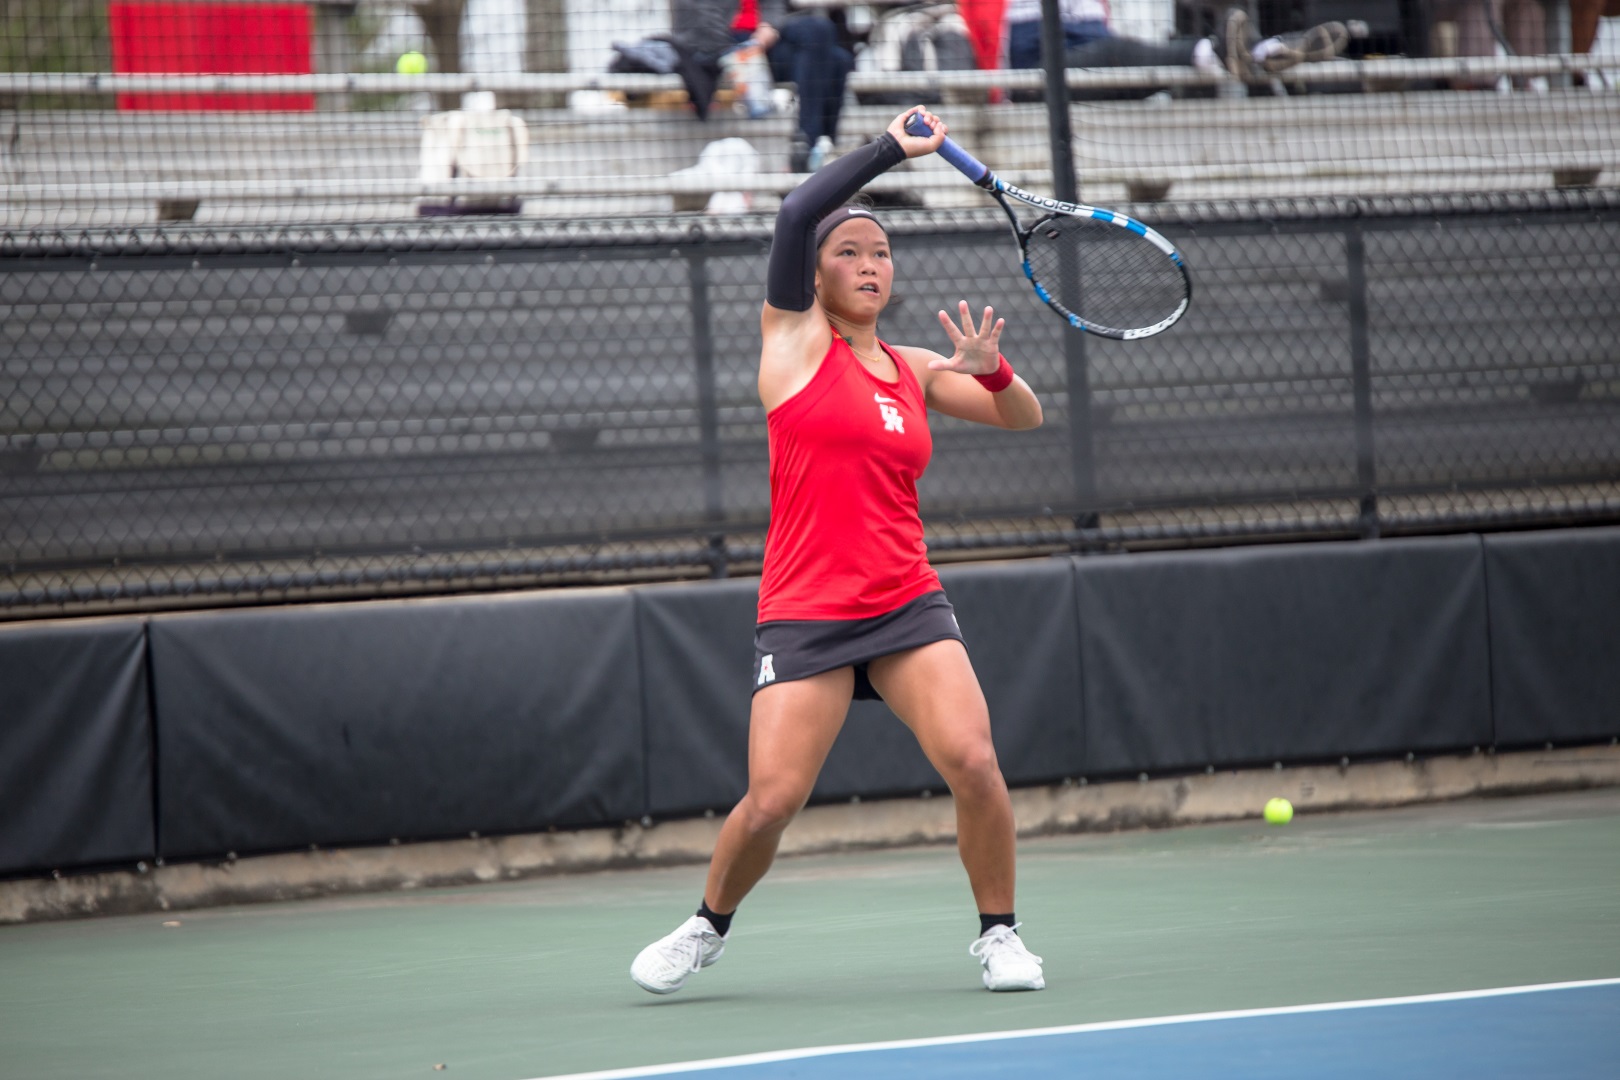 Senior Phonexay Chitdara helped lead the Cougars in their ITA Regionals competition over the weekend in College Station. | File photo